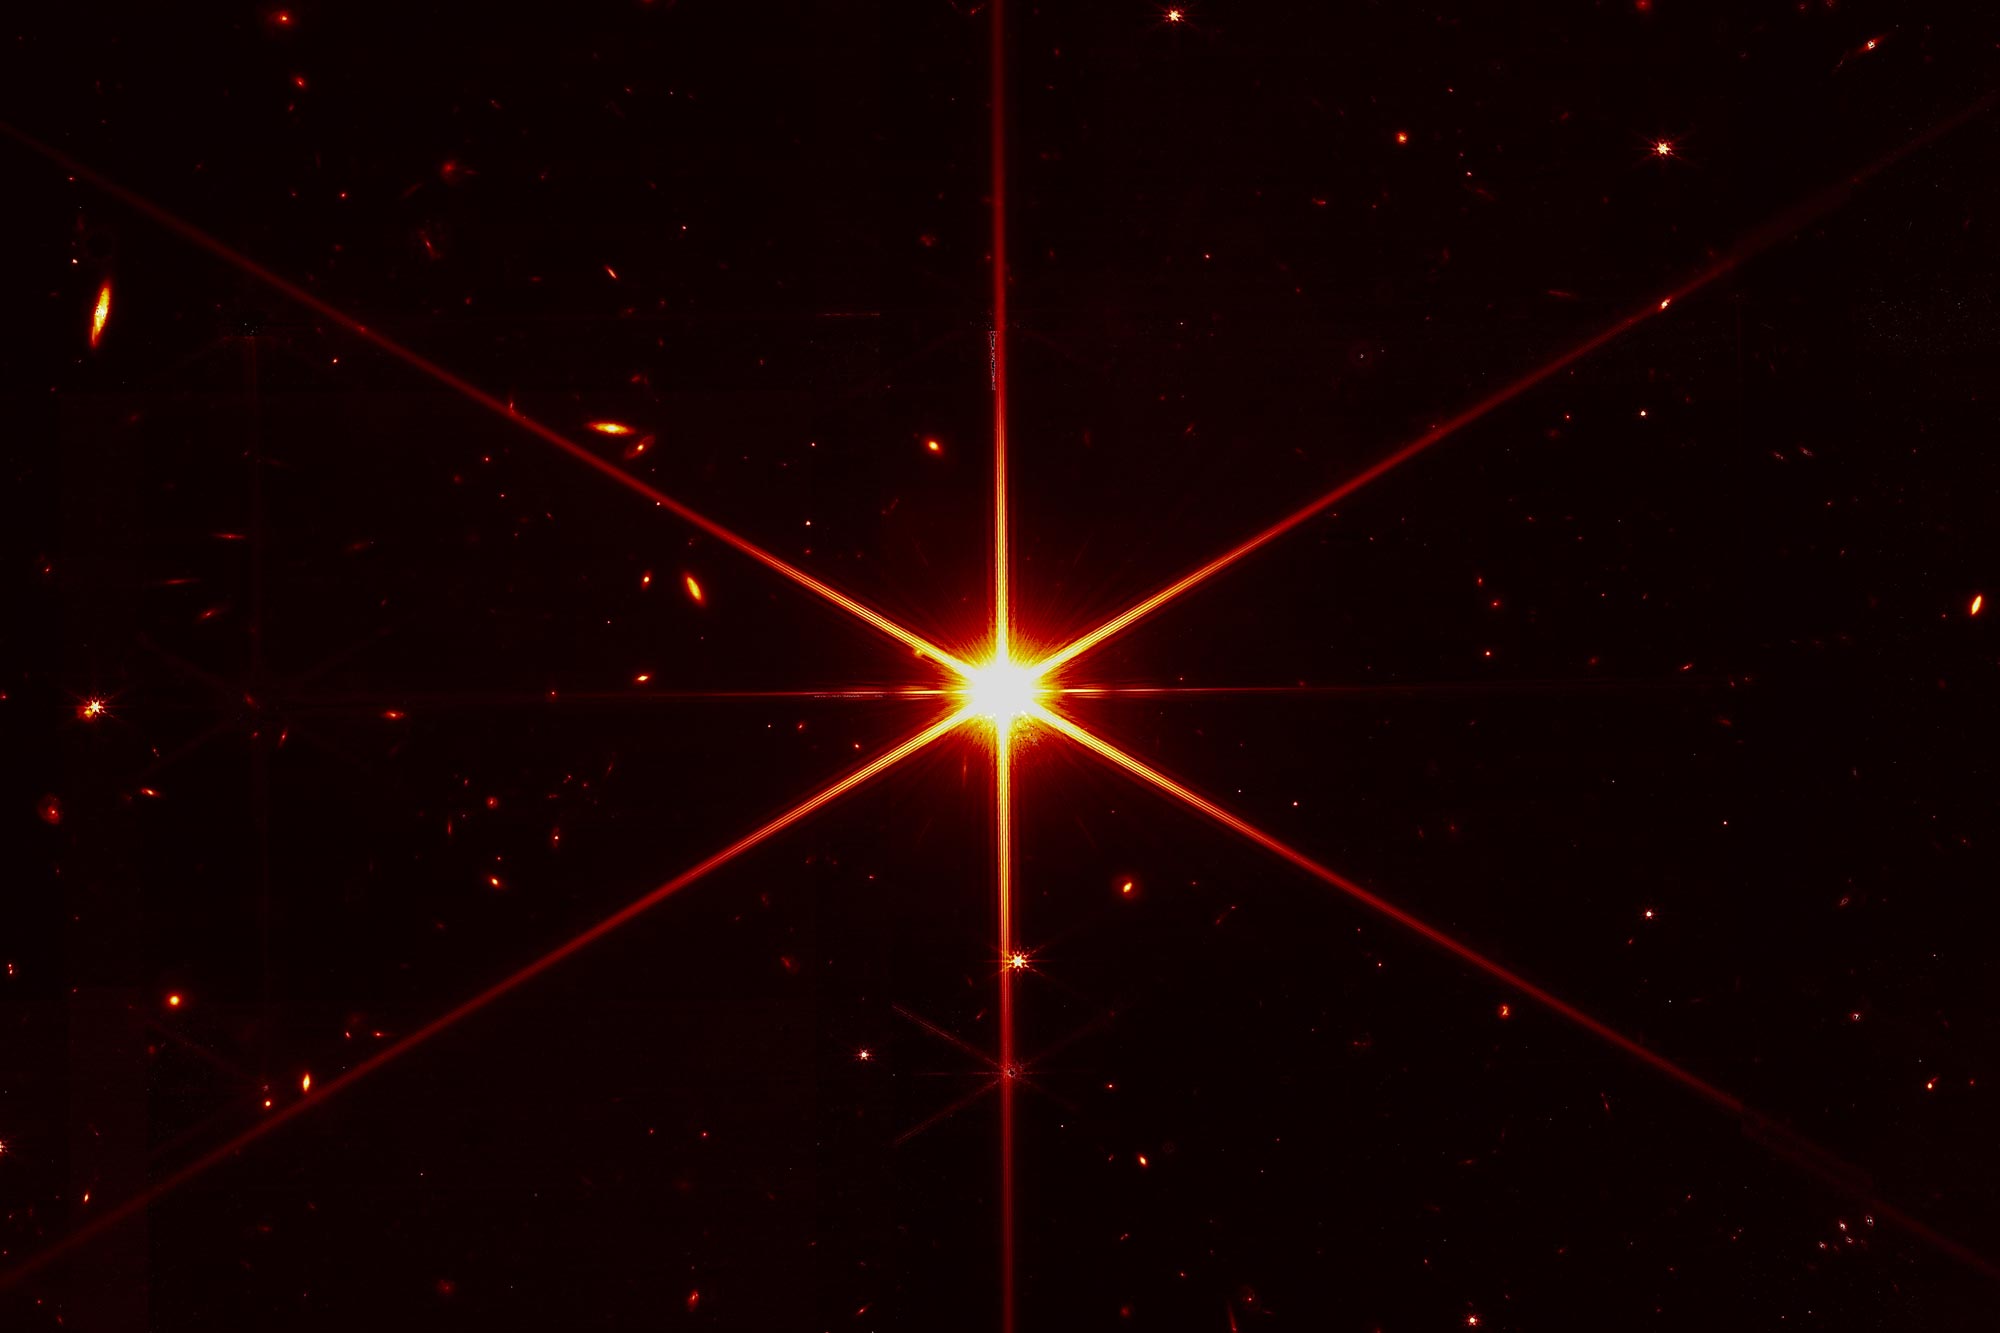 A bright star surrounded by faint images of other stars and distant galaxies